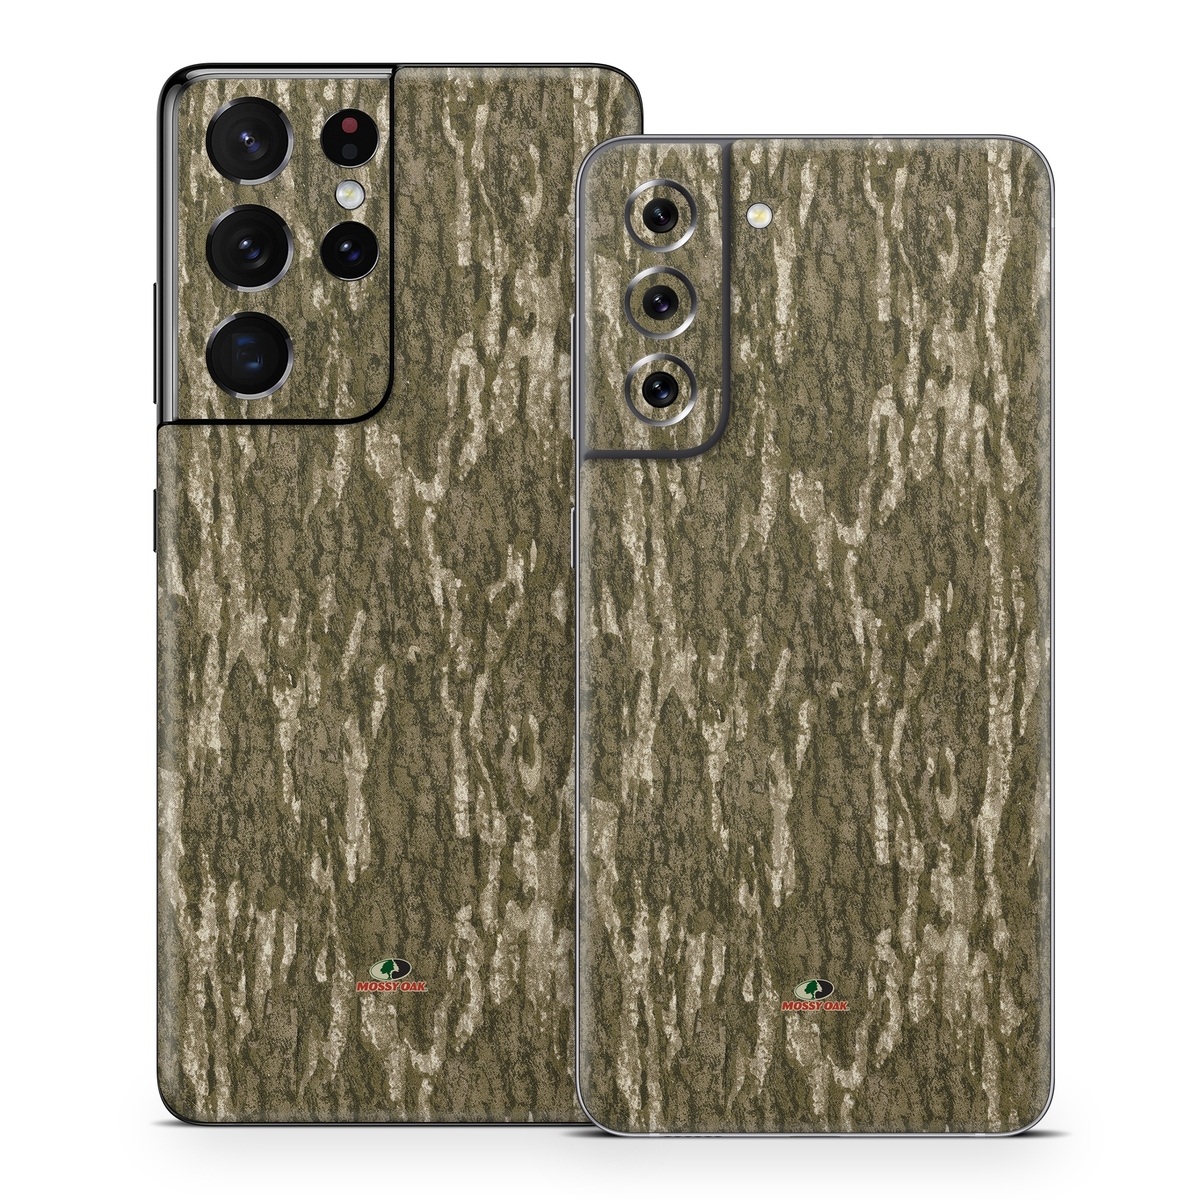 Samsung Galaxy S21 Series Skin design of Grass, Brown, Grass family, Plant, Soil, with black, red, gray colors